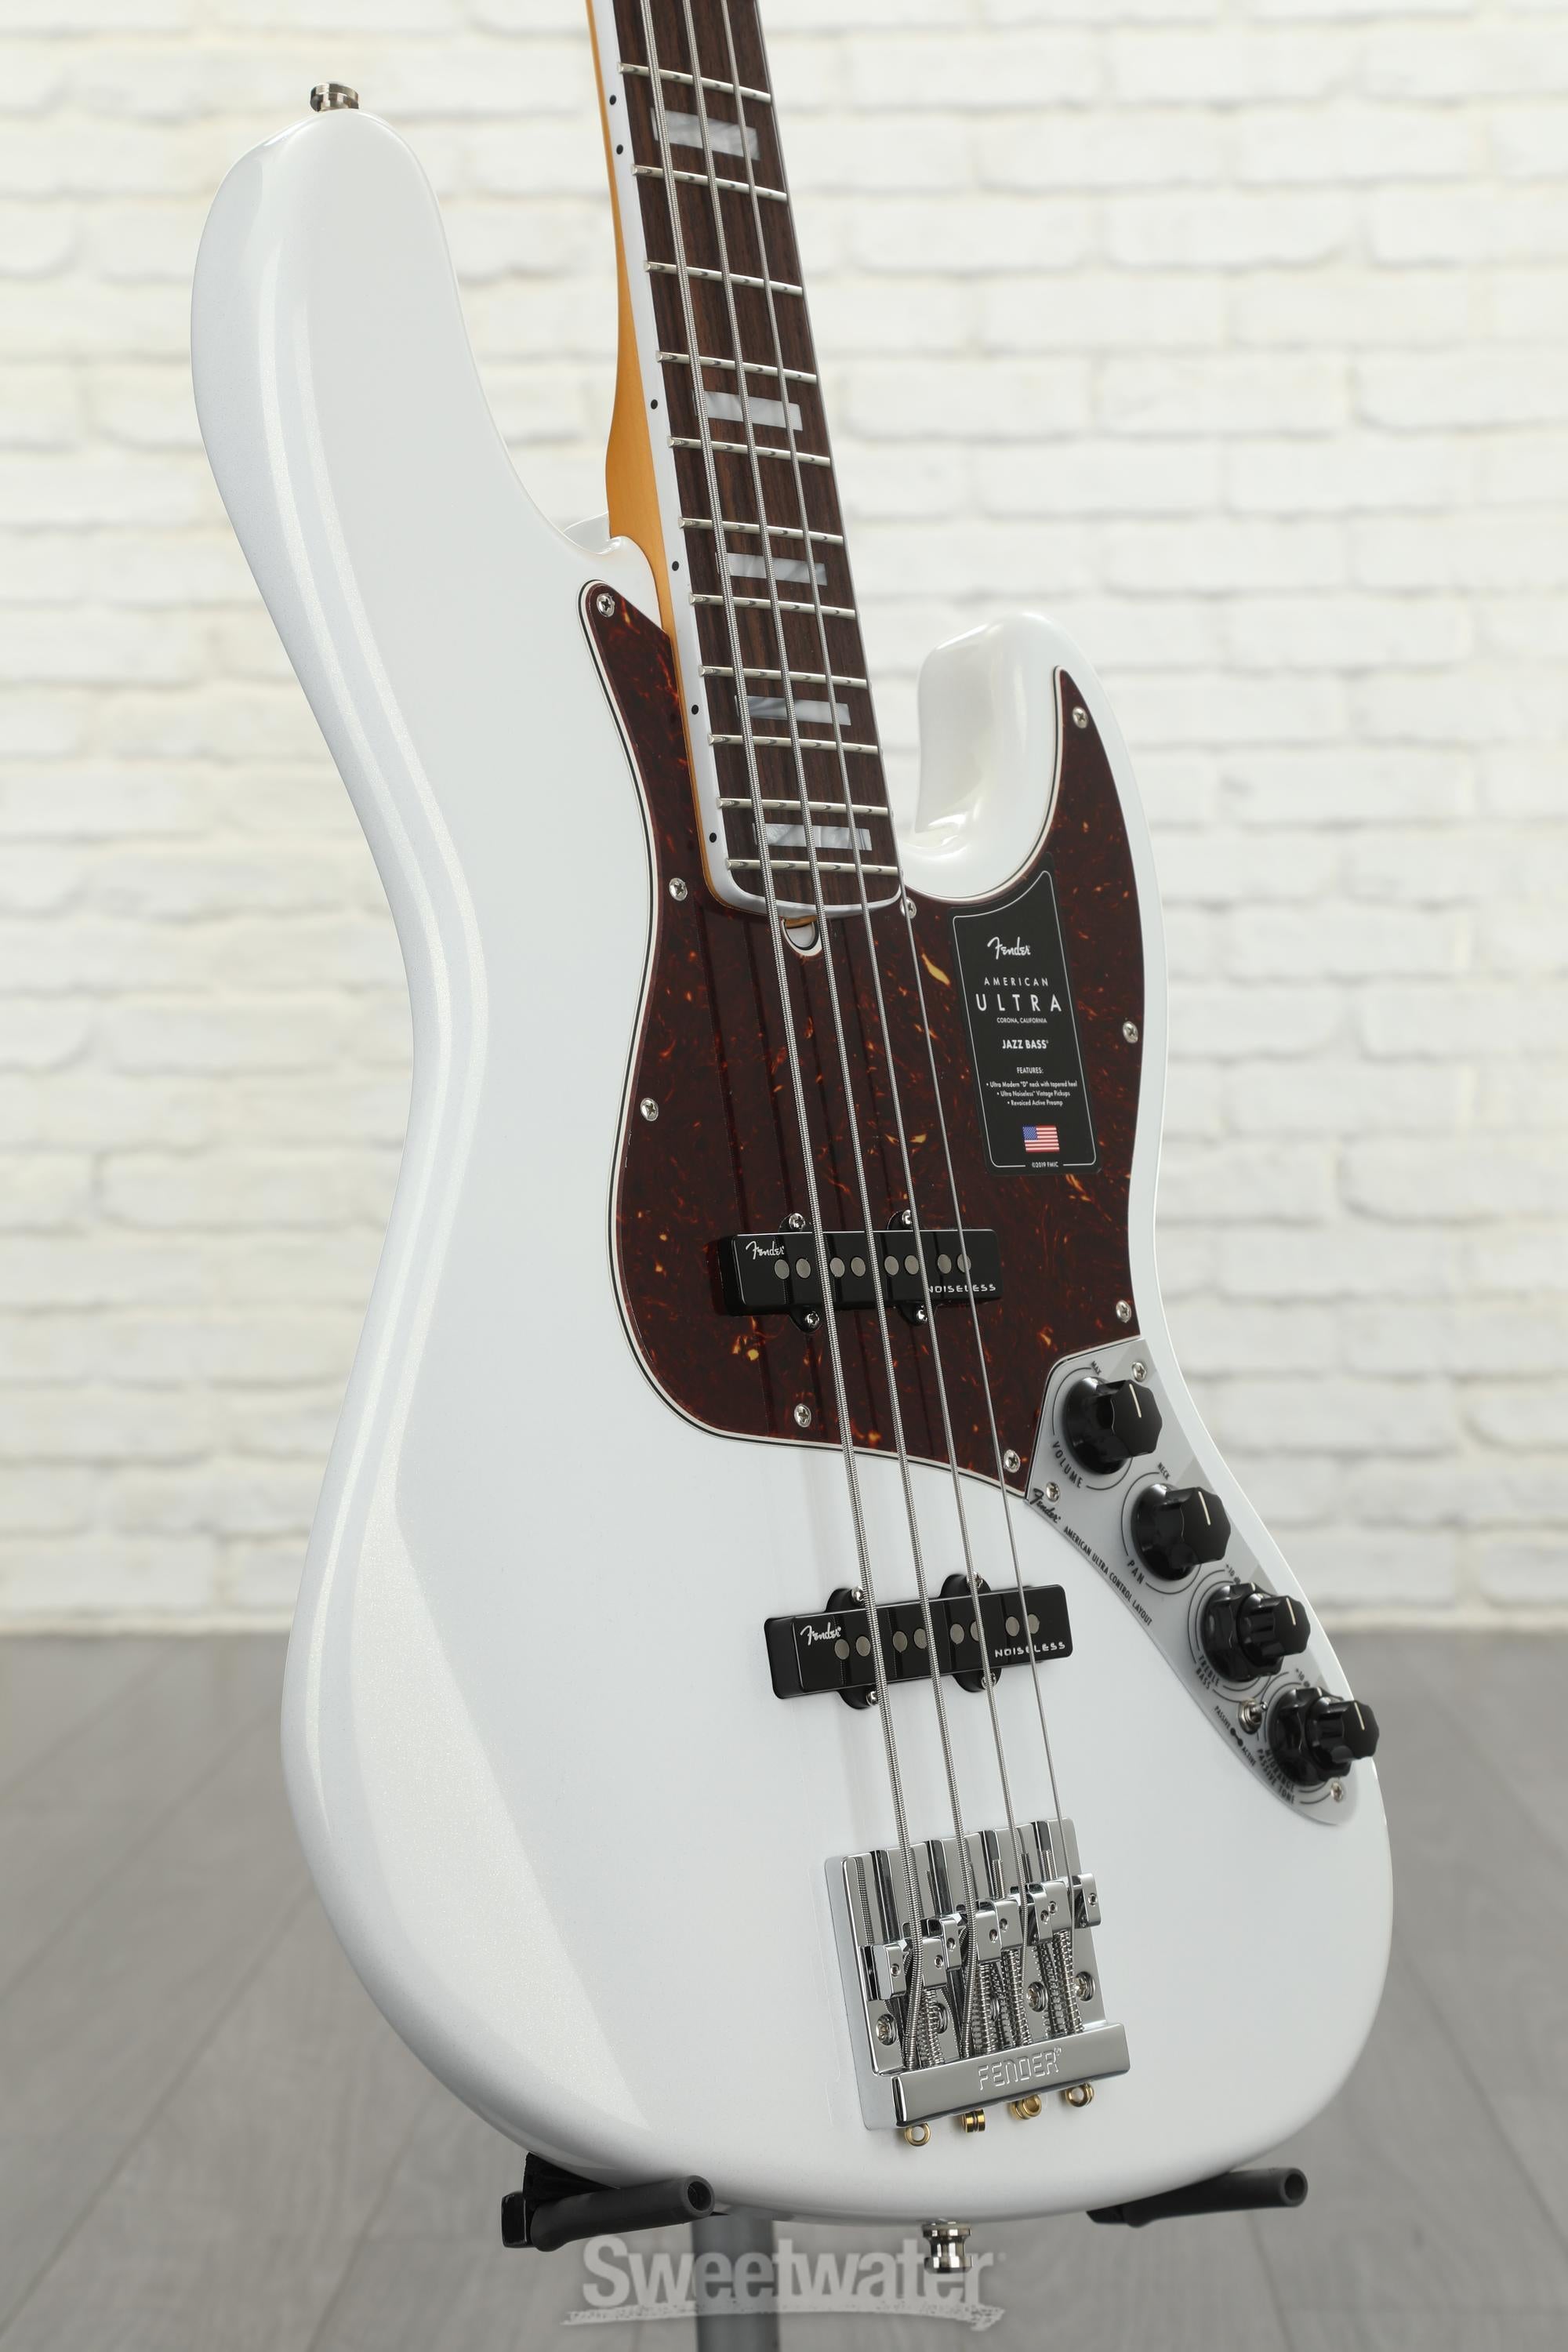 Fender American Ultra Jazz Bass - Arctic Pearl with Rosewood Fingerboard